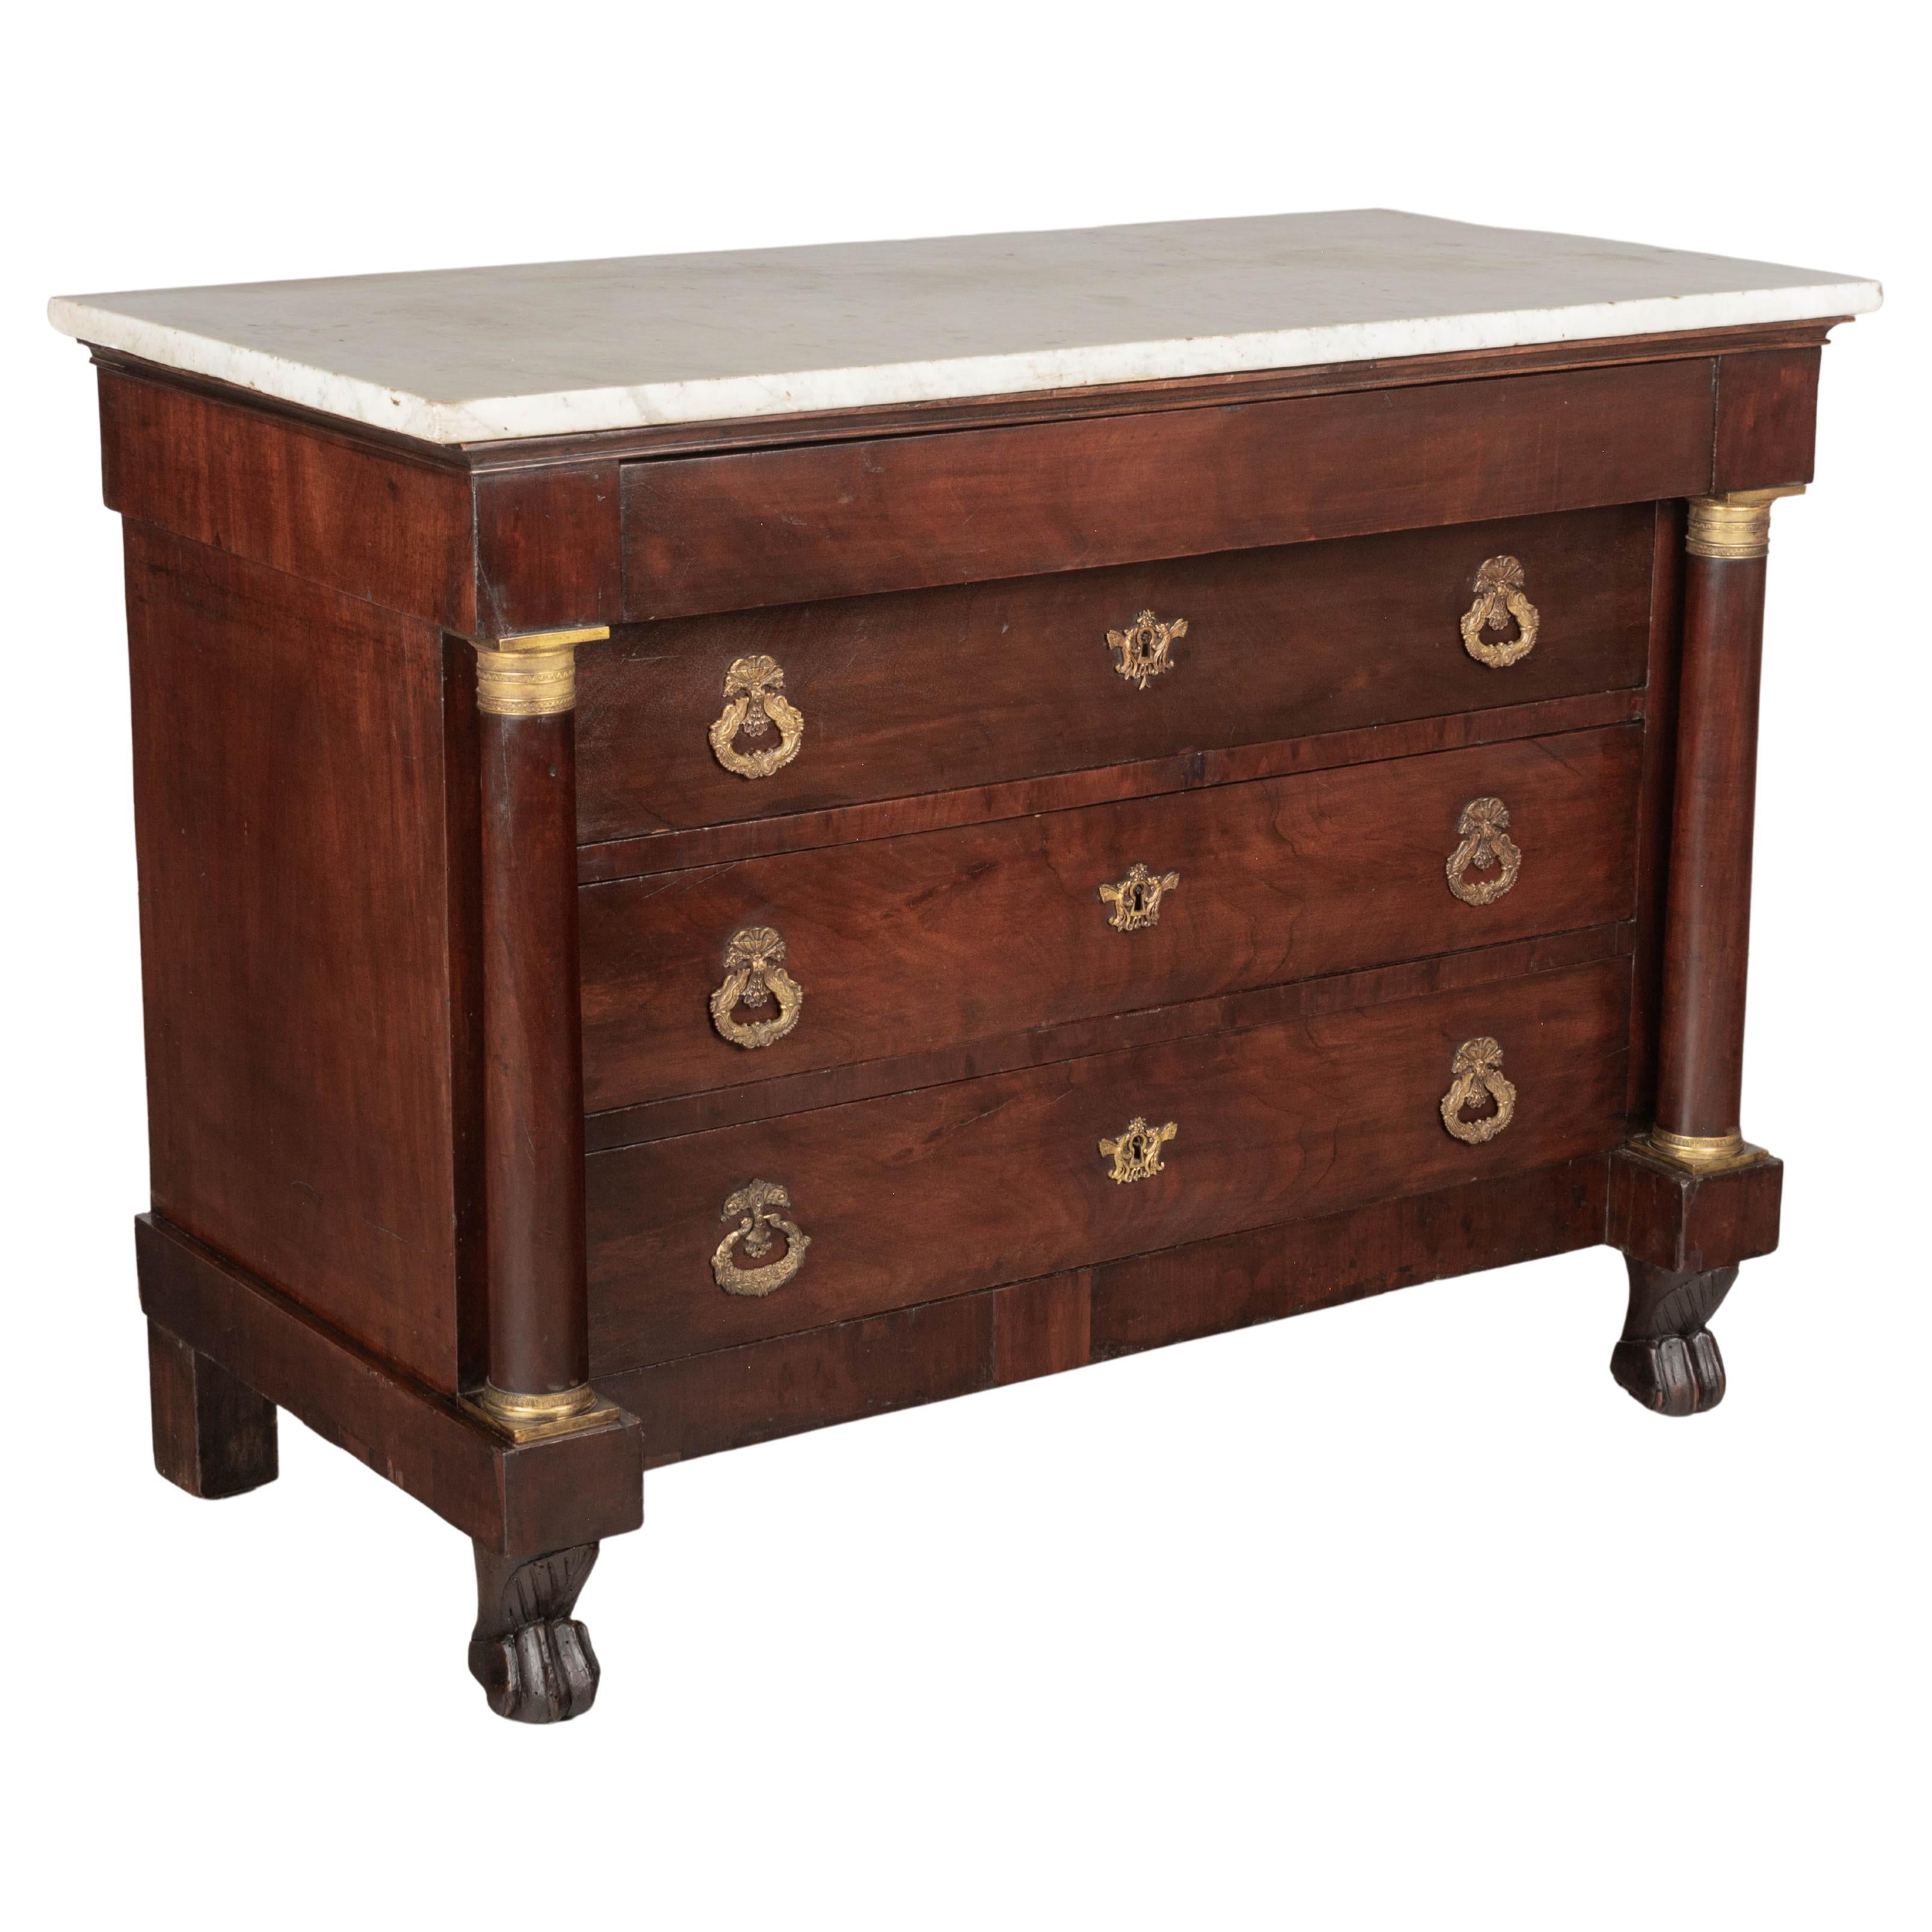 19th Century French Empire Commode or Chest of Drawers For Sale